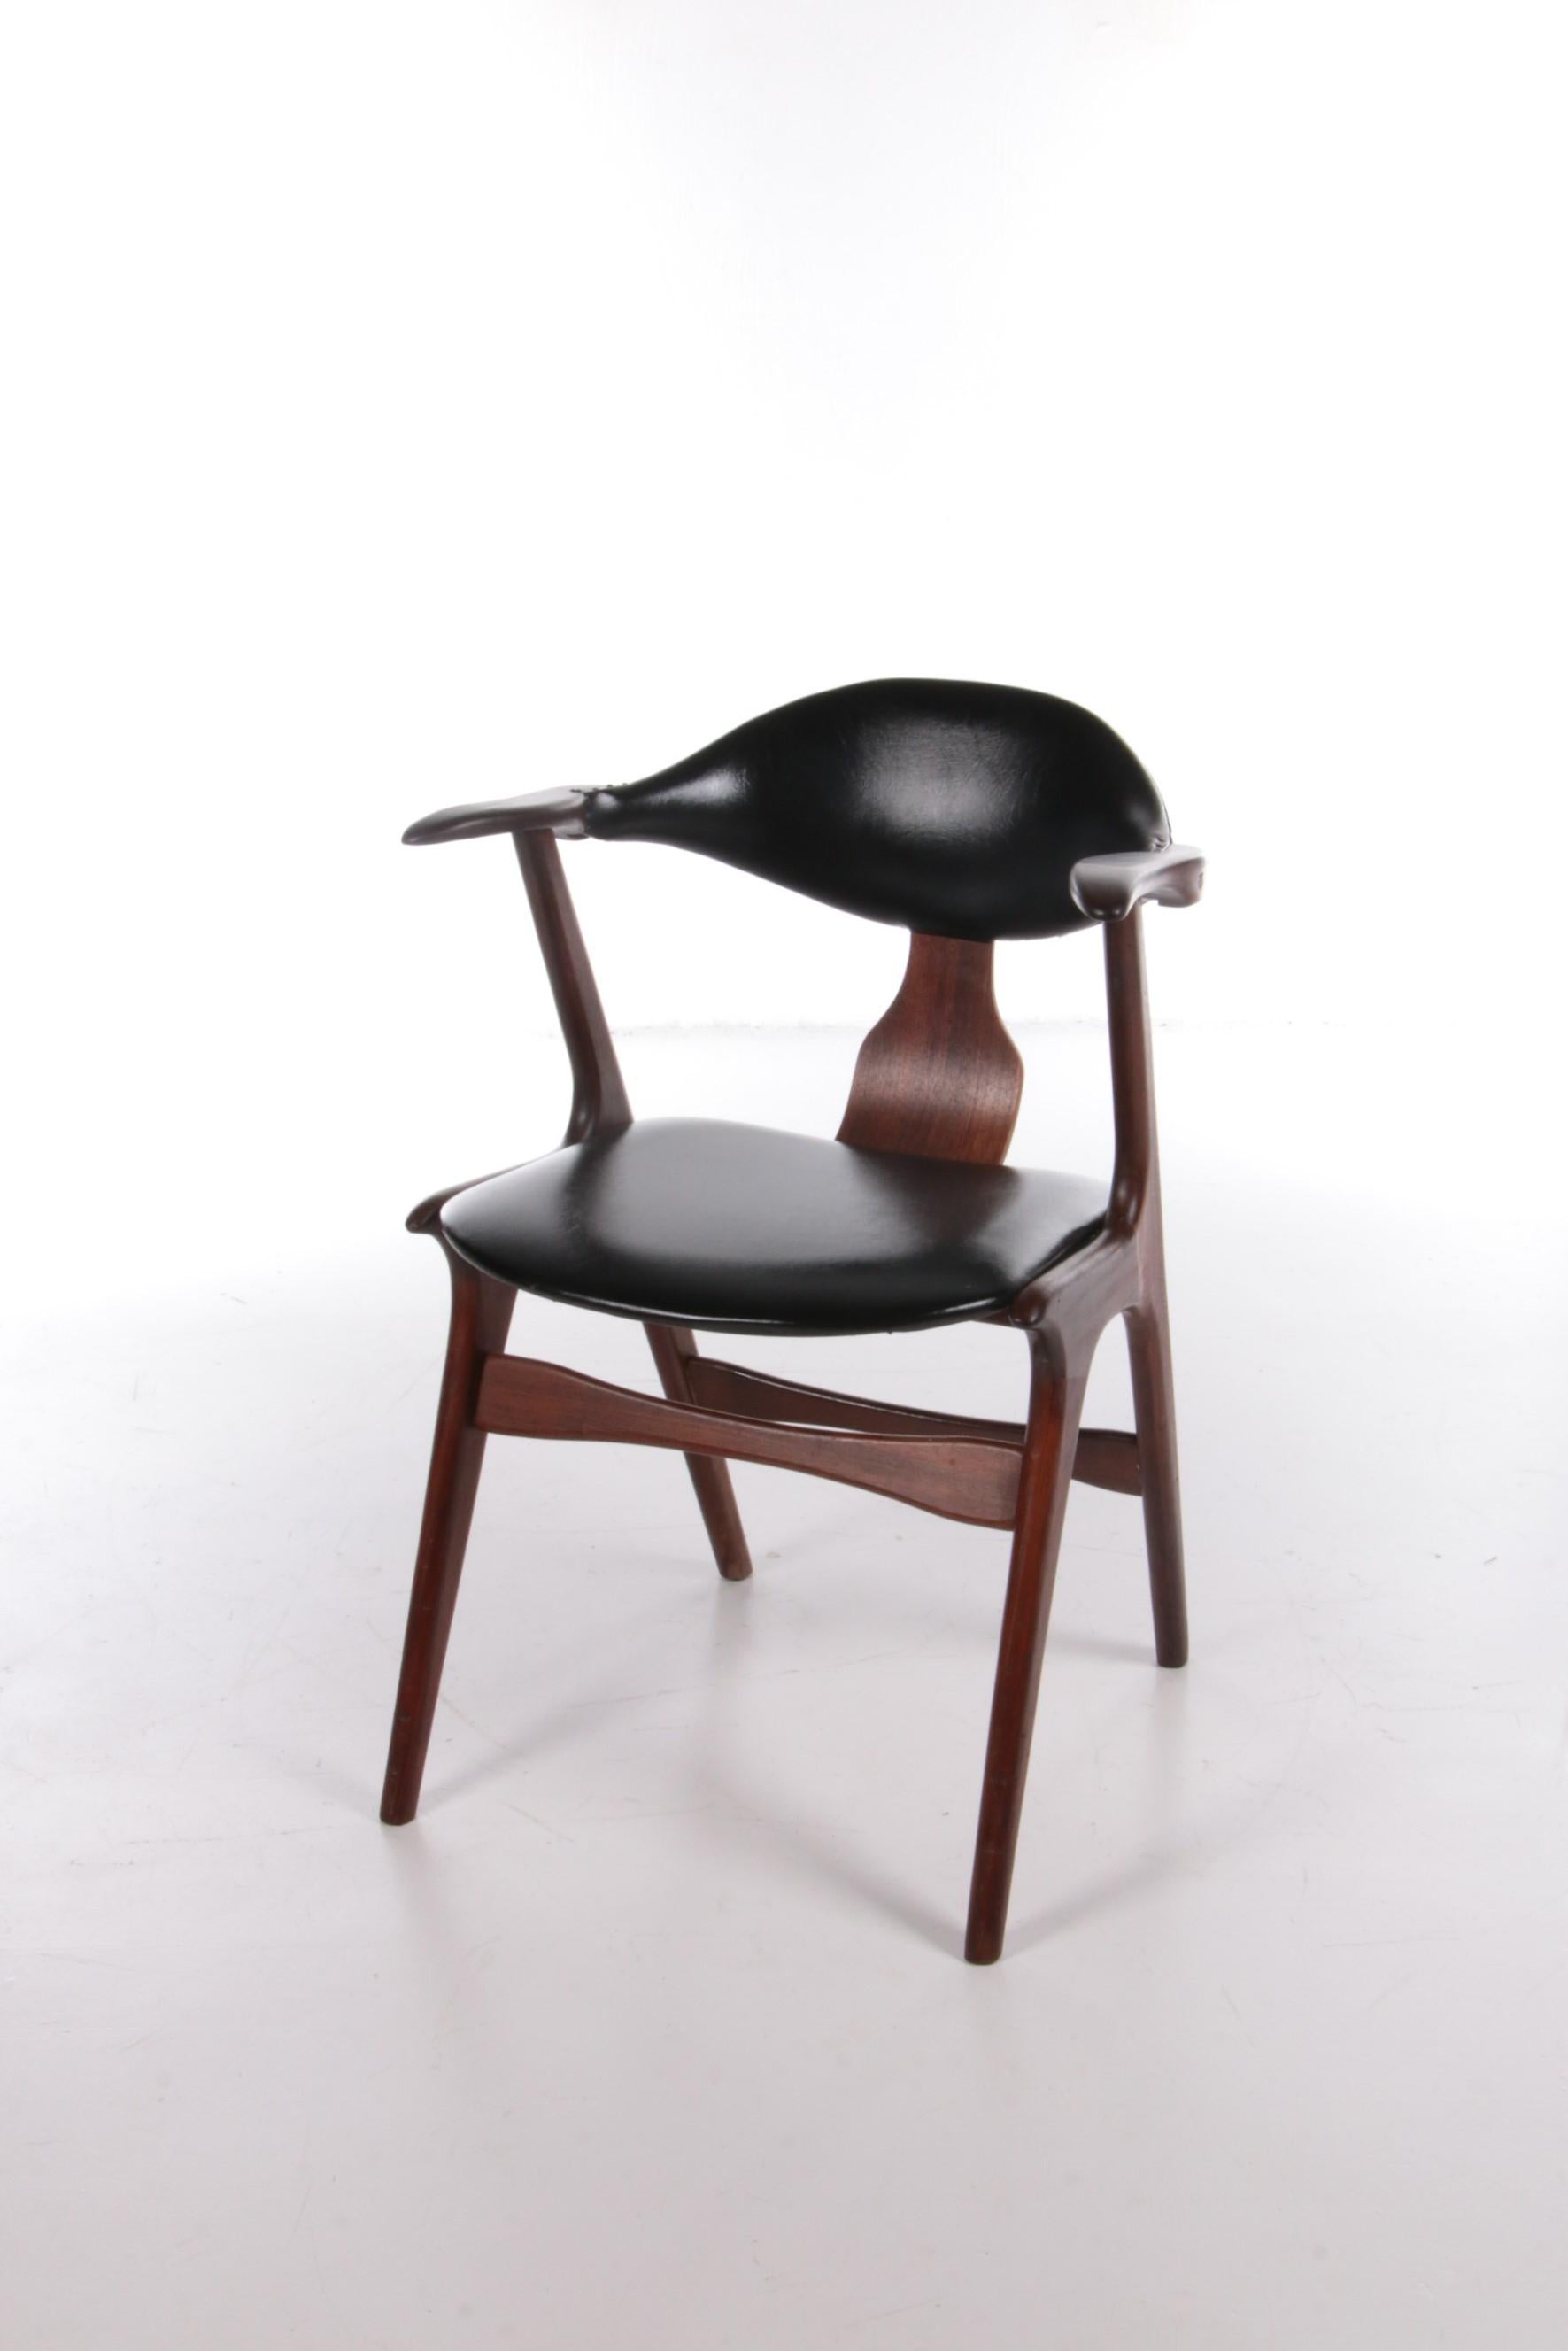 Louis van Teeffelen cow horn chair Wébé


Special cow horn chair by producer Wébé / AWA, made of teak plywood and solid wood, beautifully combined with black artificial leather upholstery. The chair is in beautiful vintage condition, almost like